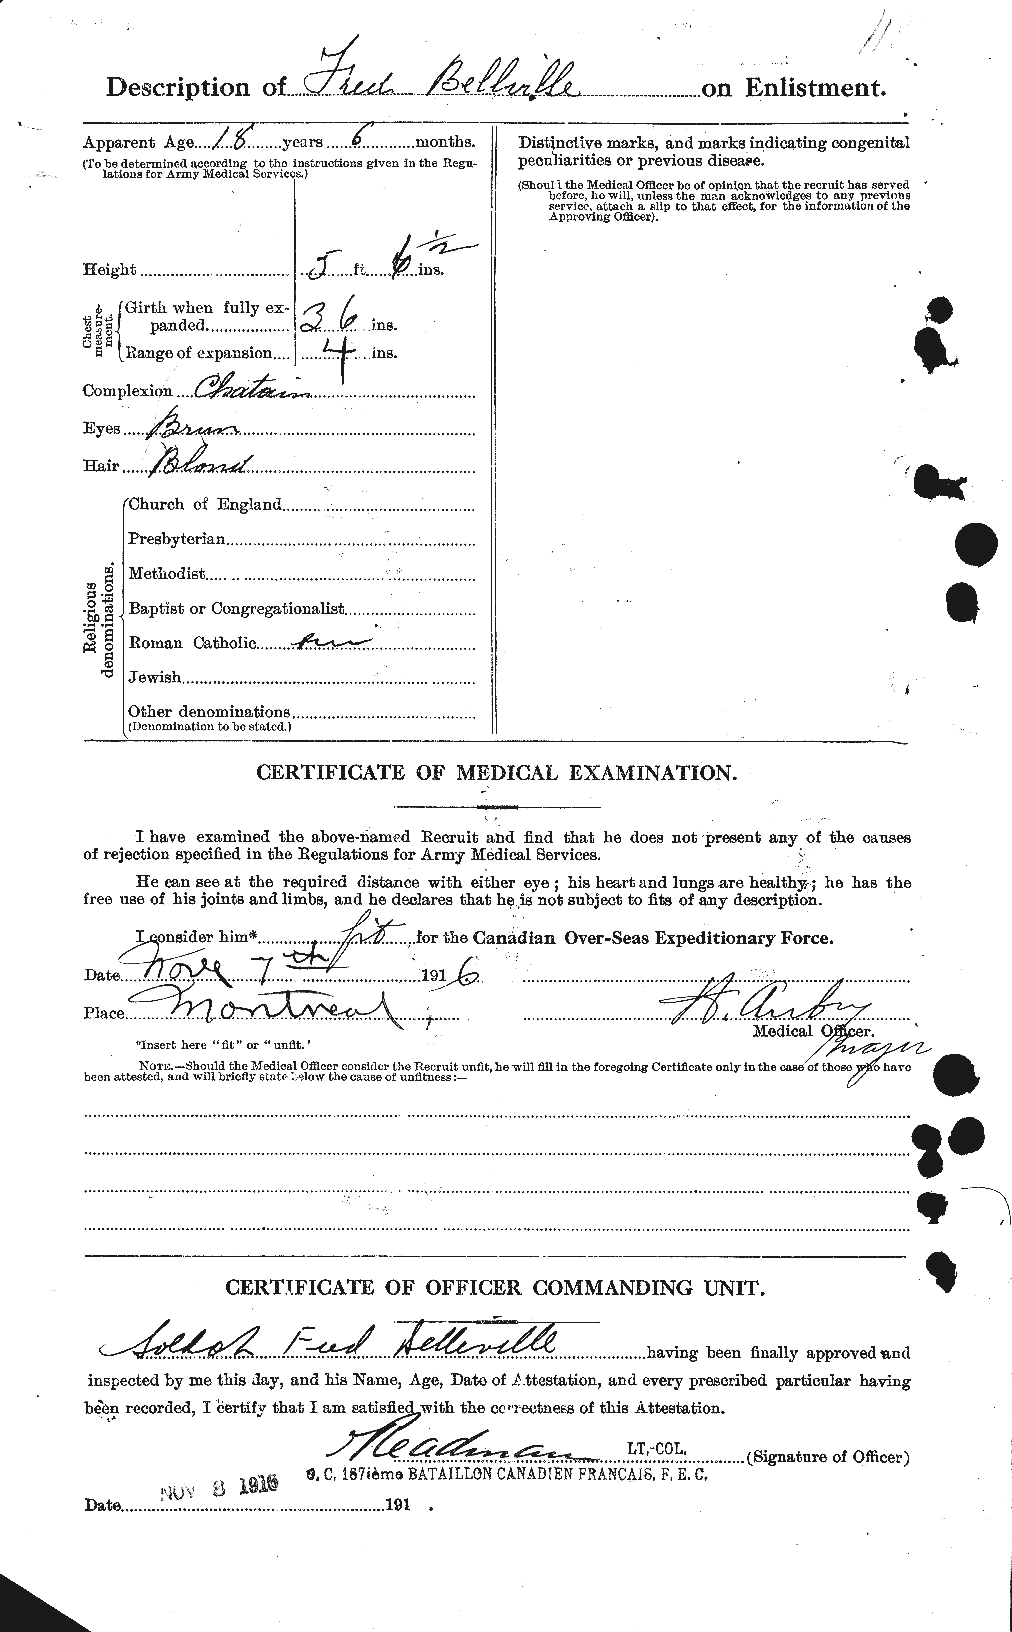 Personnel Records of the First World War - CEF 233572b